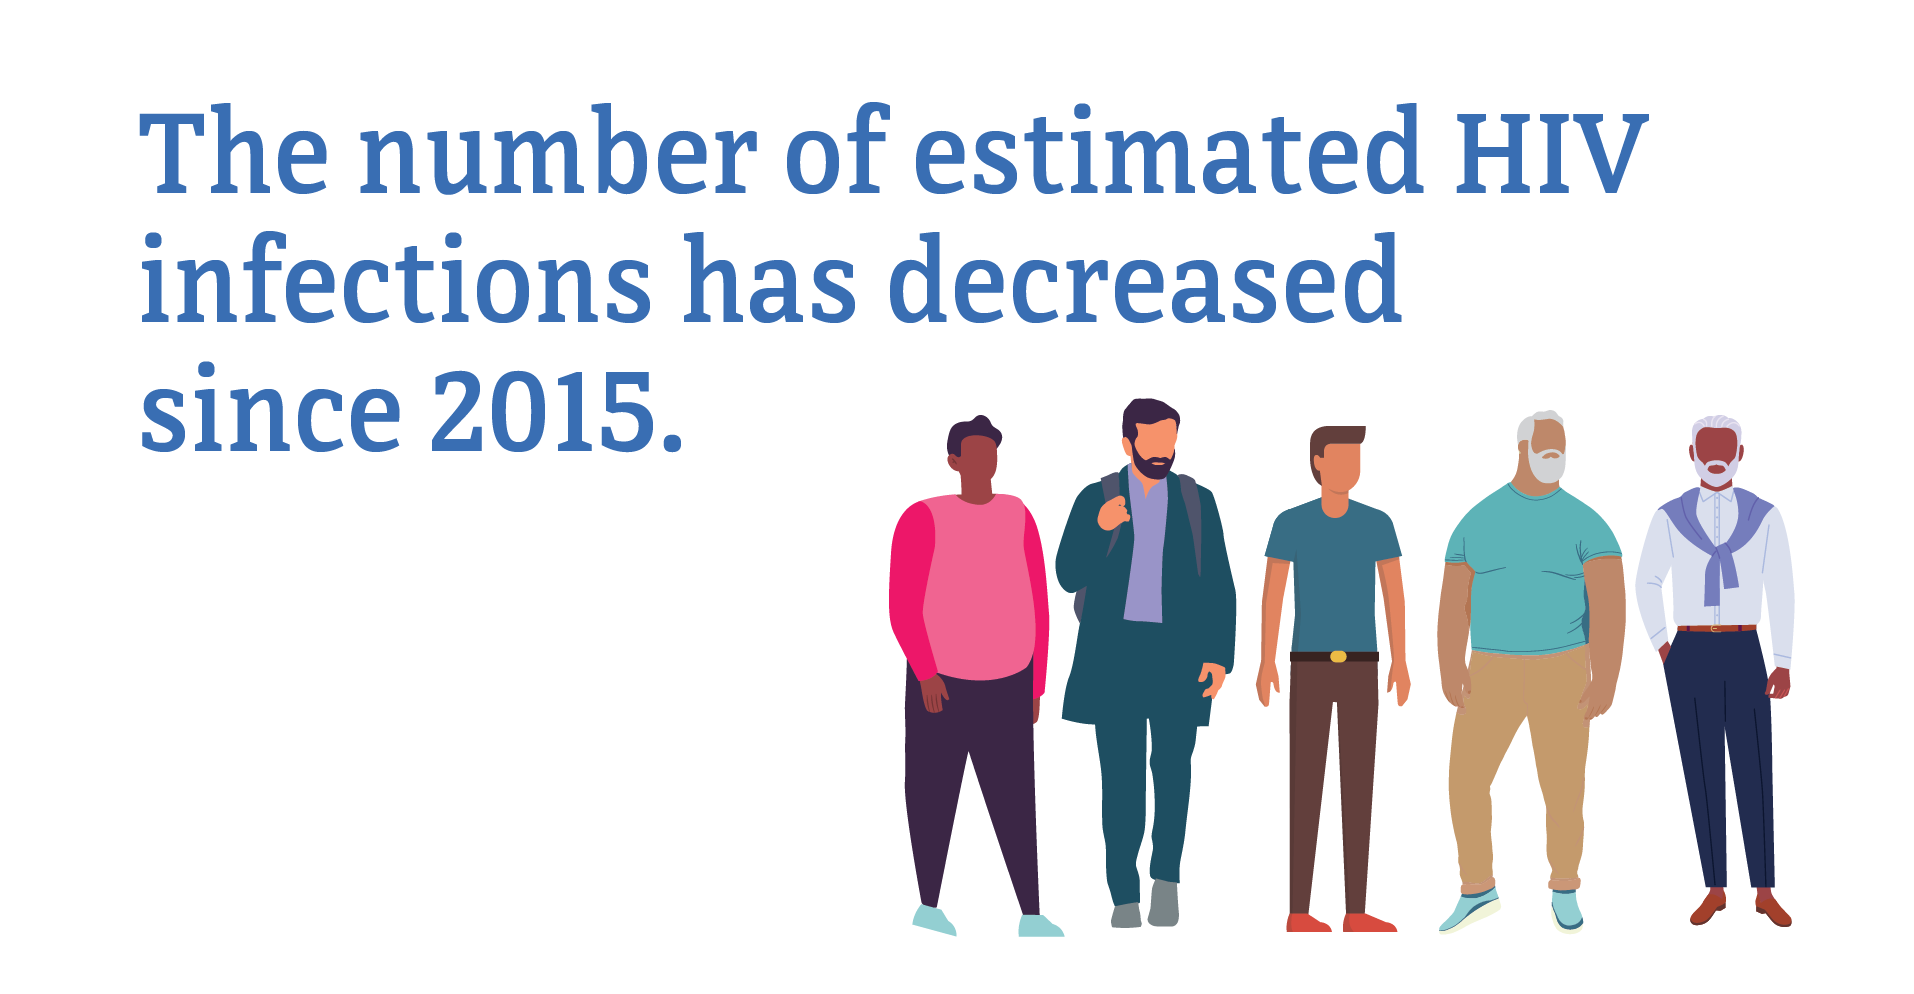 The number of estimated HIV infections decreased among Hispanic/Latino gay and bisexual men.